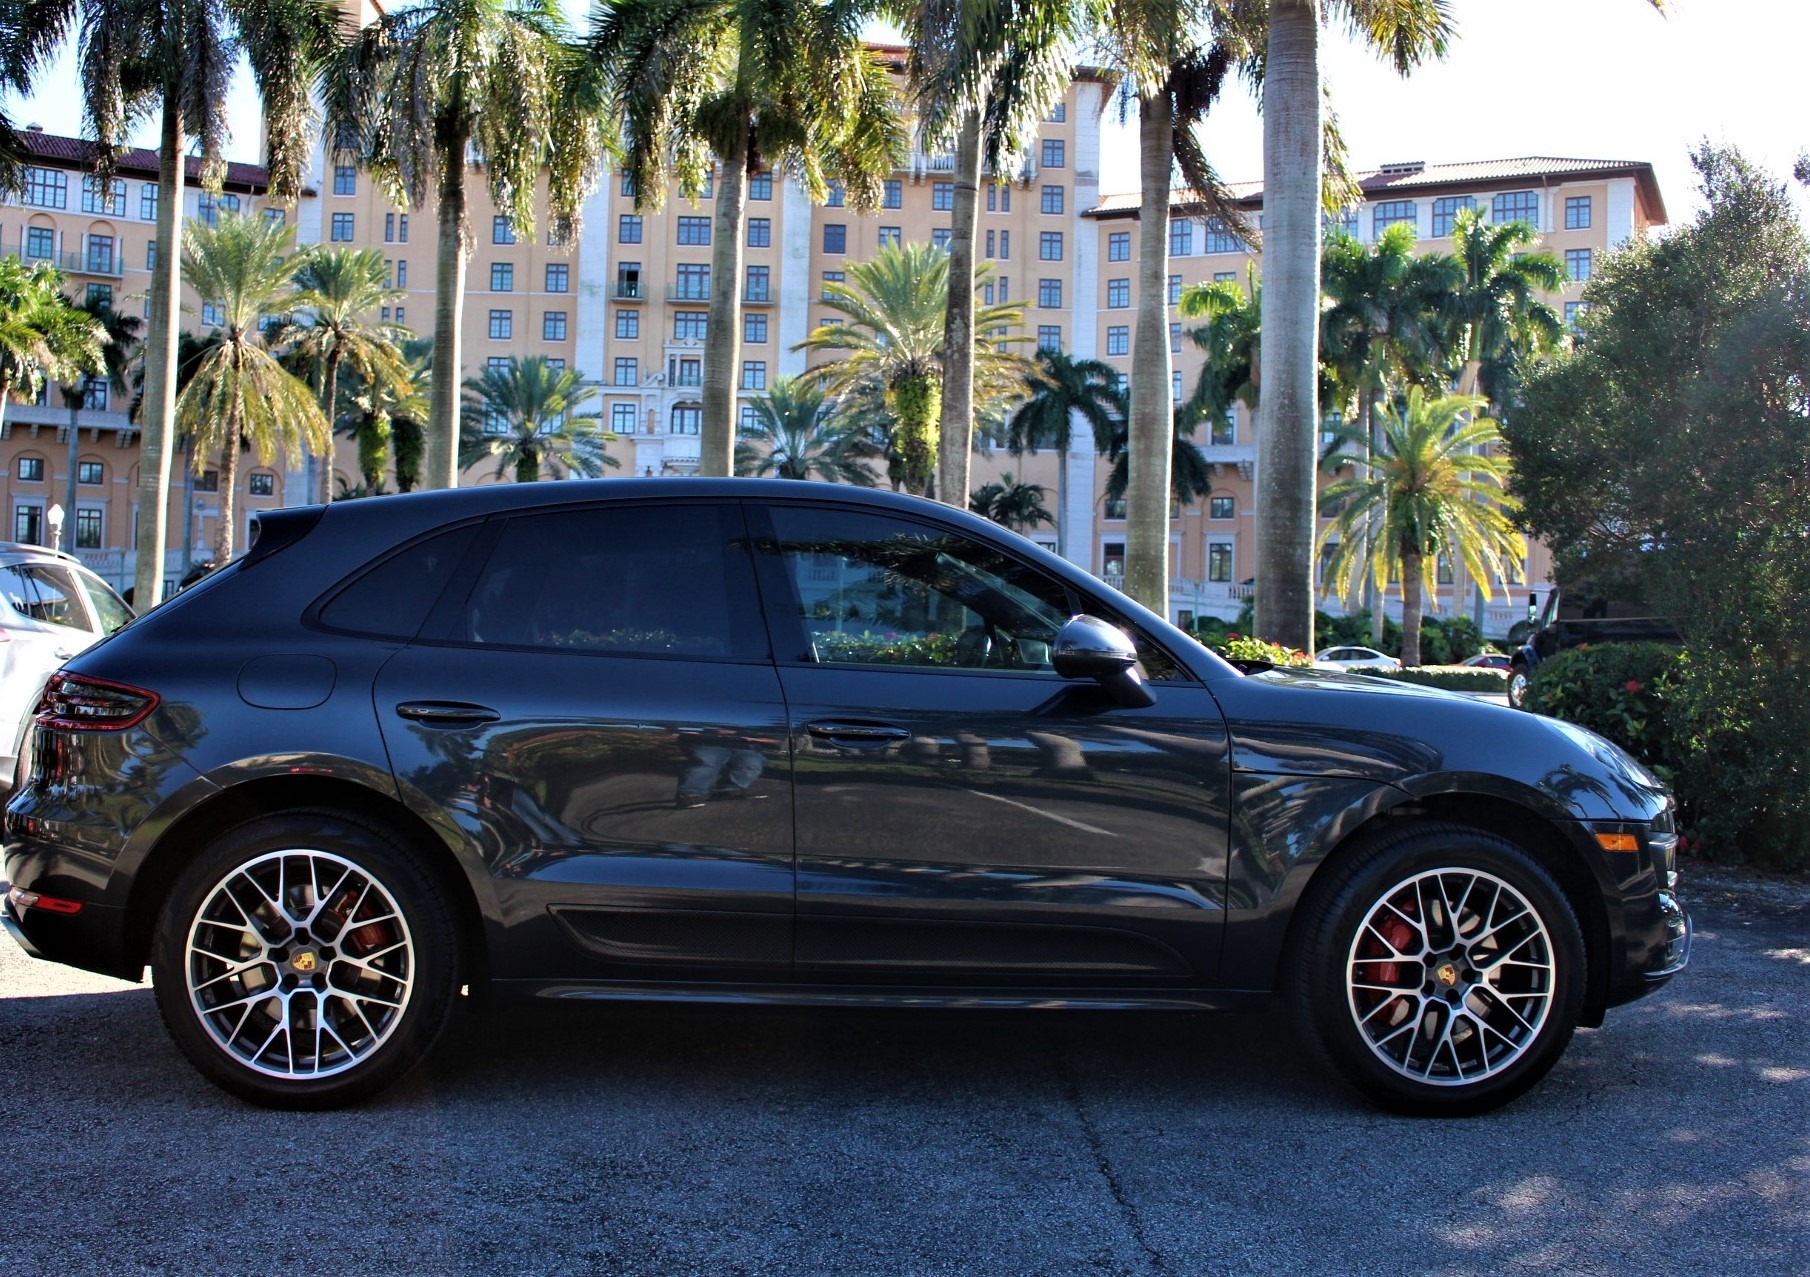 Used 2017 Porsche Macan Turbo for sale Sold at The Gables Sports Cars in Miami FL 33146 1